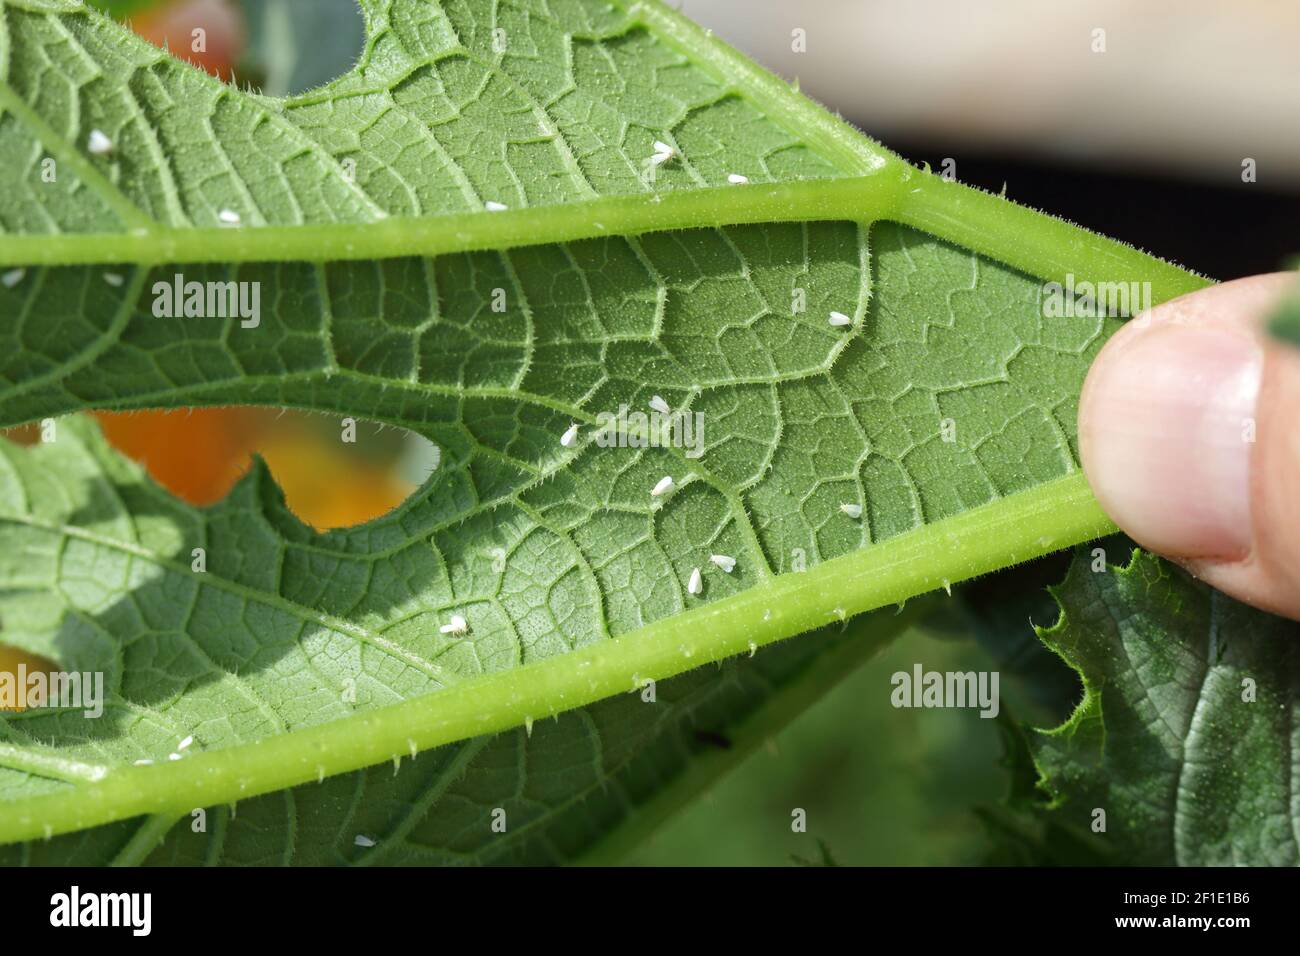 Silverleaf whitefly, Bemisia tabaci (Hemiptera: Aleyrodidae) is an important agricultural pest. Insects on the bottom of zucchini leaf. Stock Photo